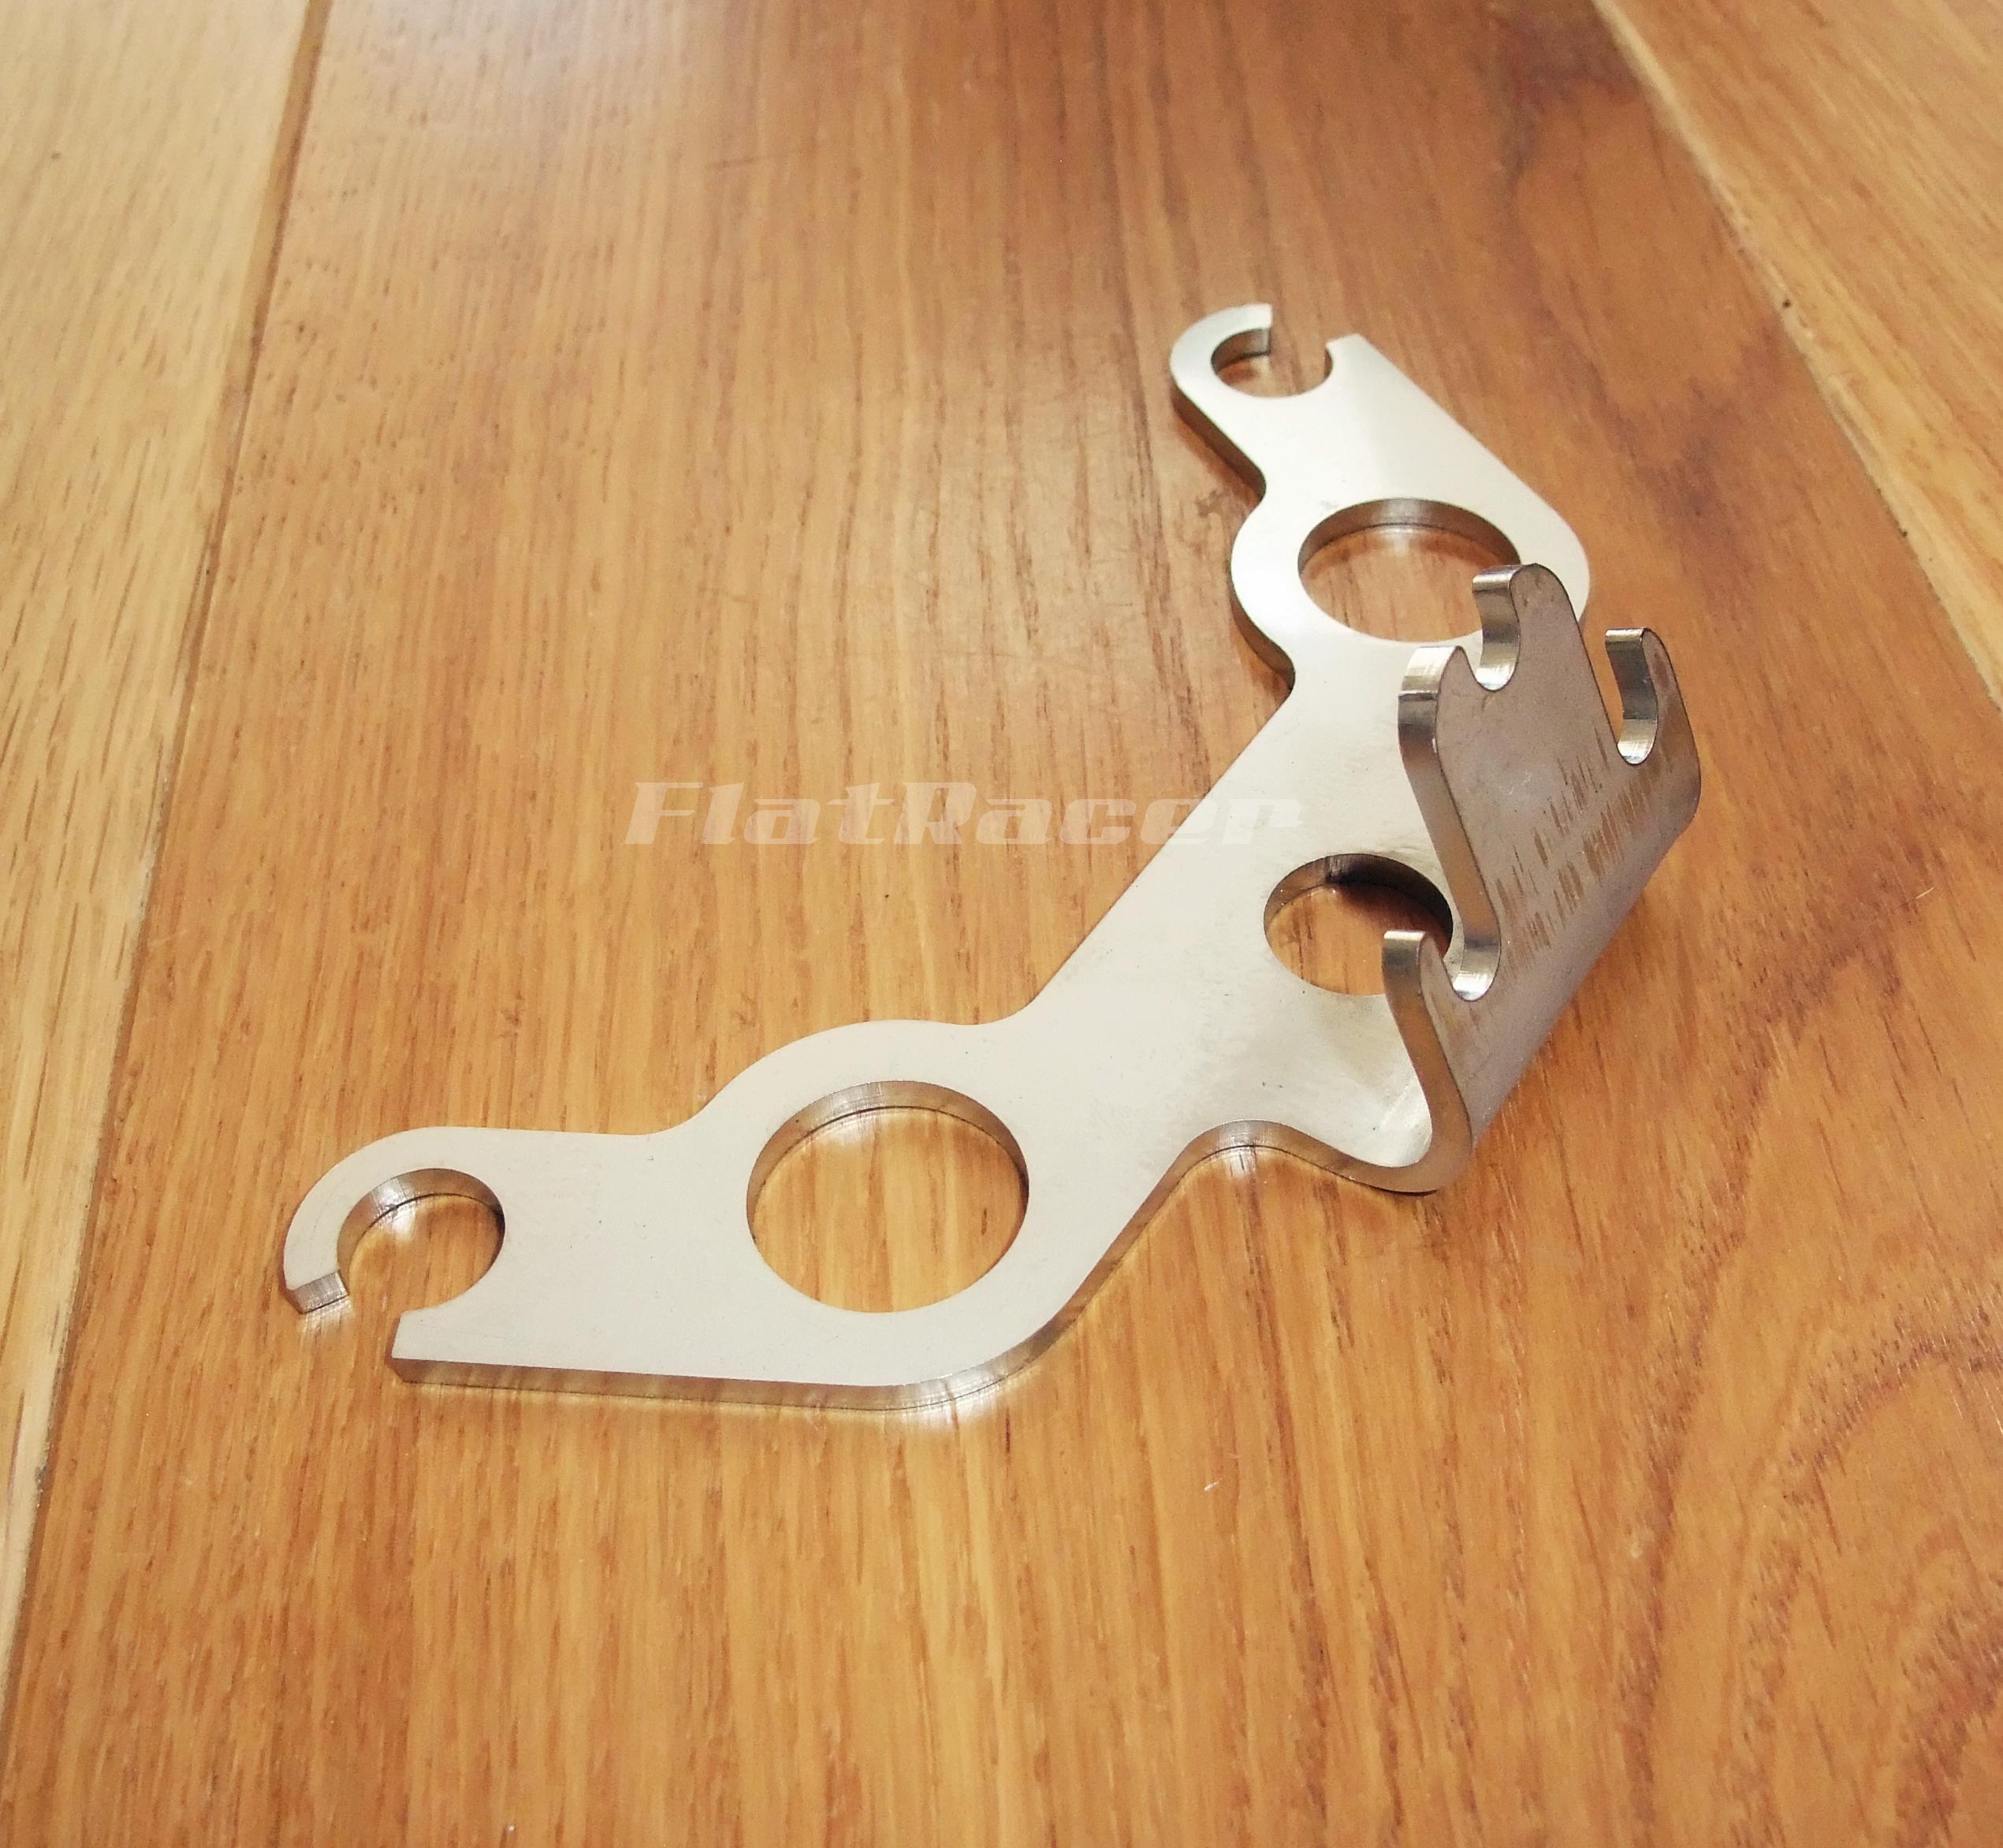 FlatRacer BMW Airhead Boxer stainless steel ultra-low instrument cluster bracket